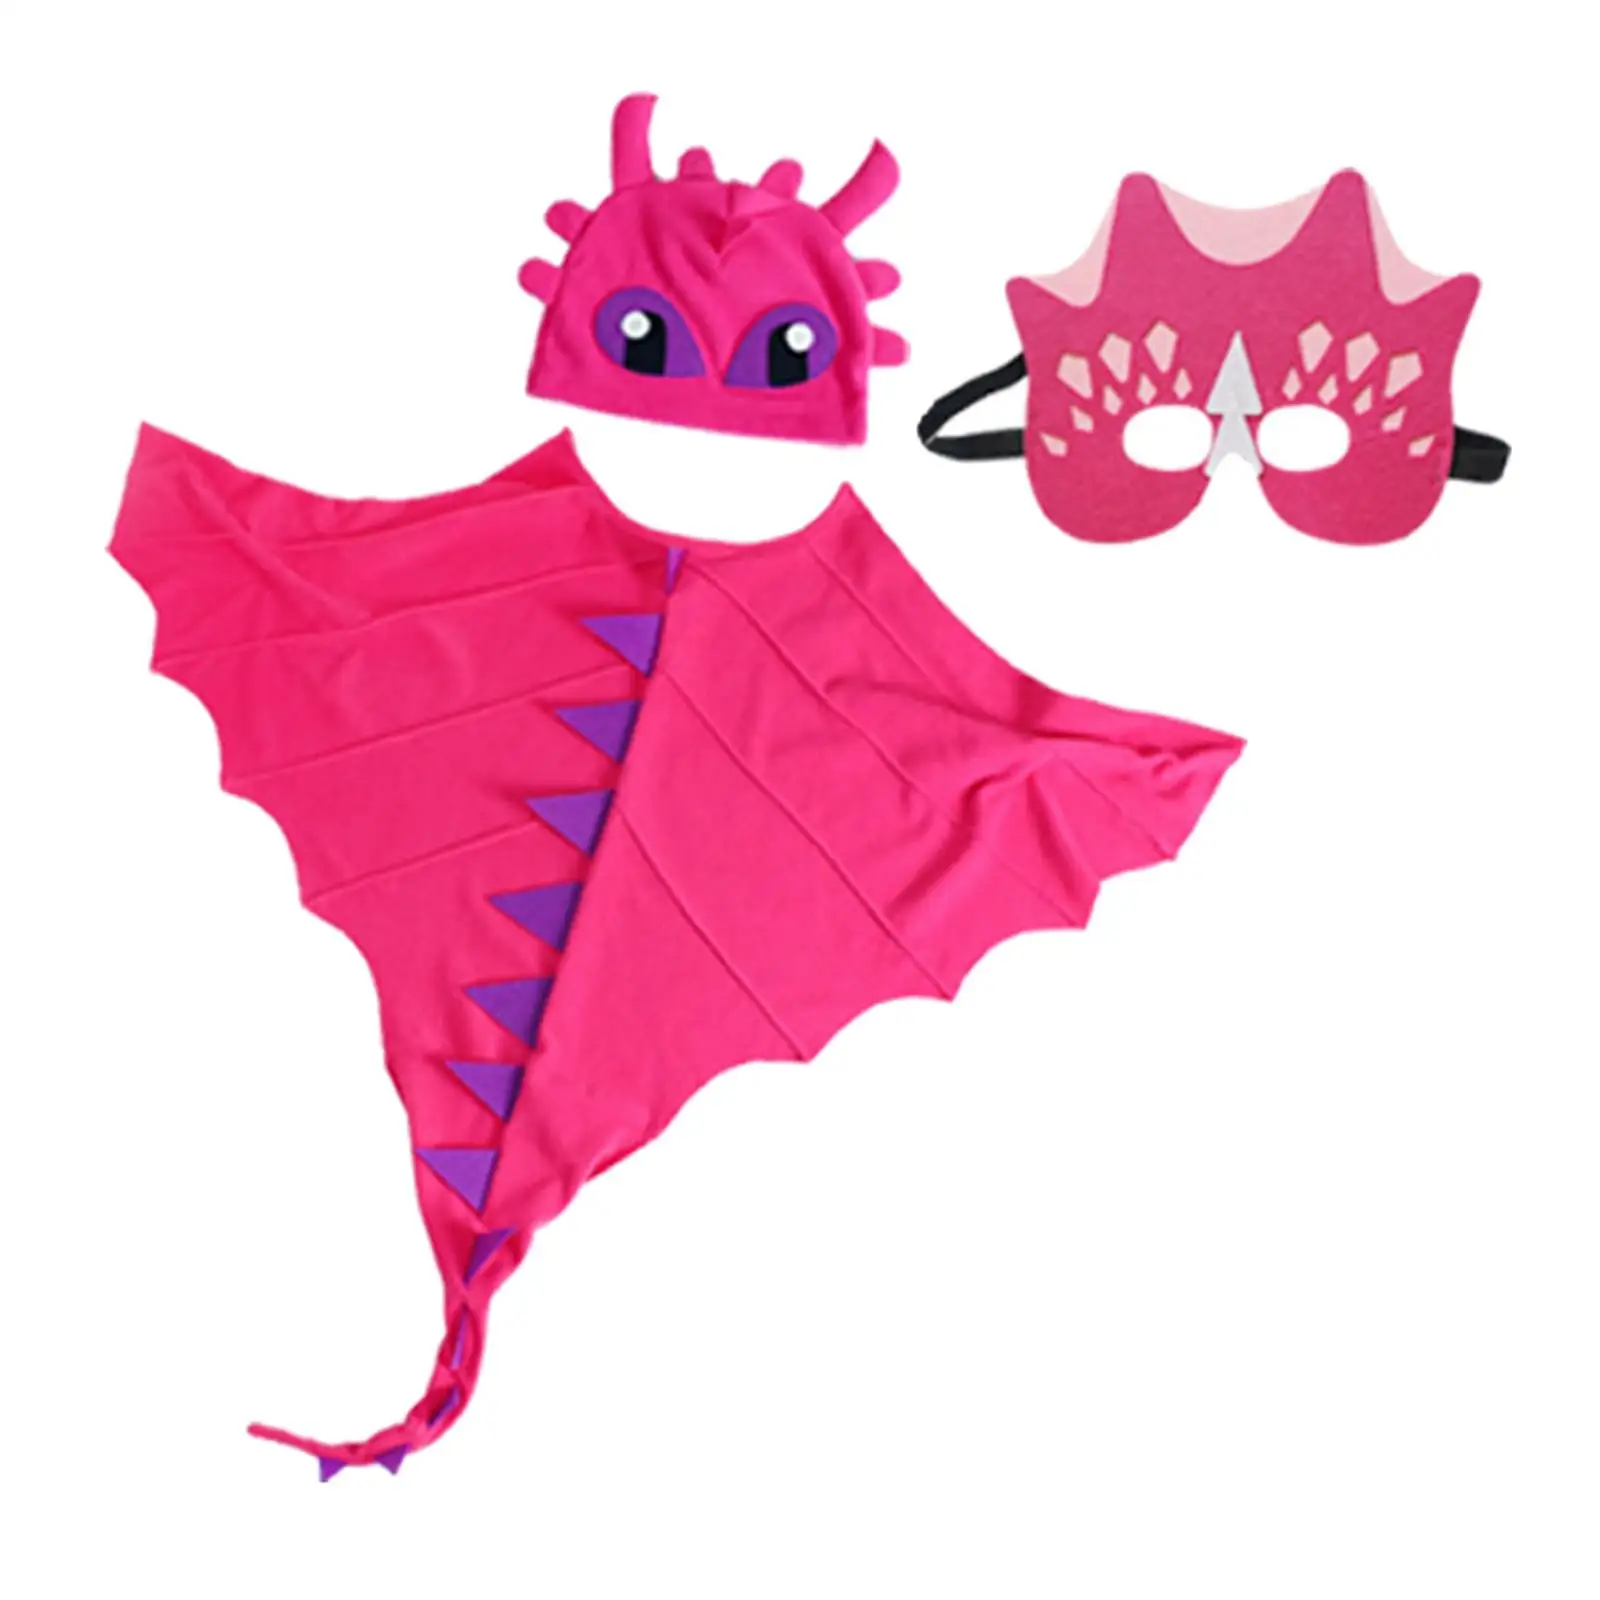 Toothless Dragon Costume Dinosaur Cape Child Costume Dragon Dress Up Girls Boys Toys Halloween for Birthday Party Favors